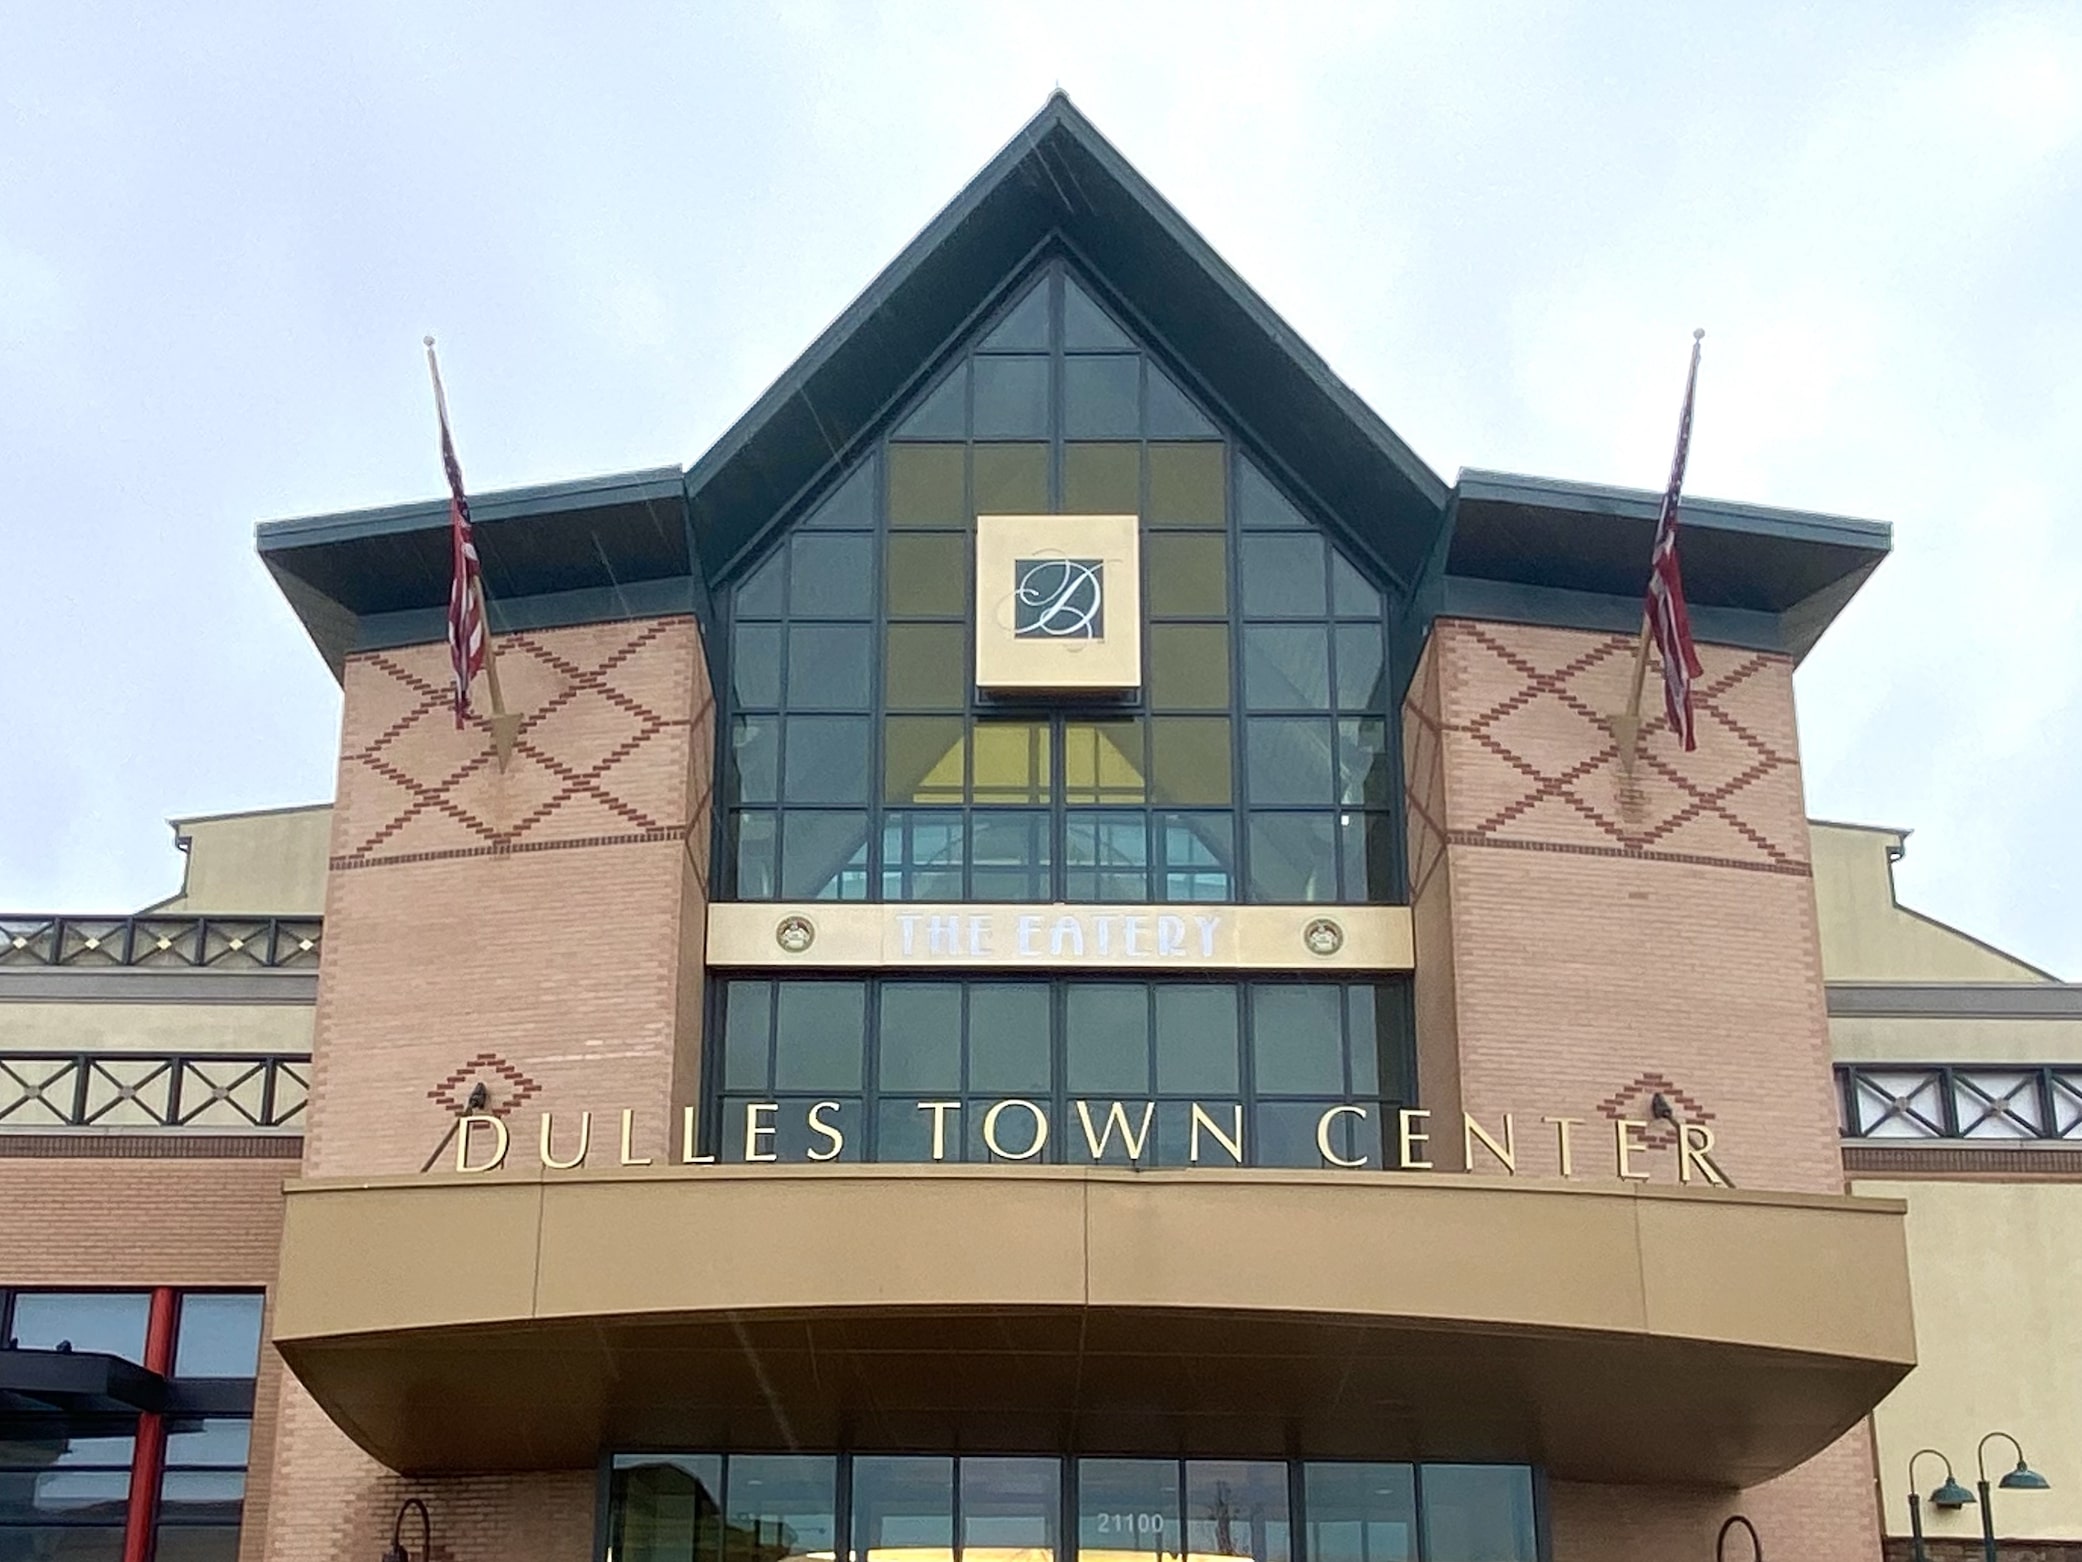 Report: Dulles Town Center mall sold for $46 million - The Burn